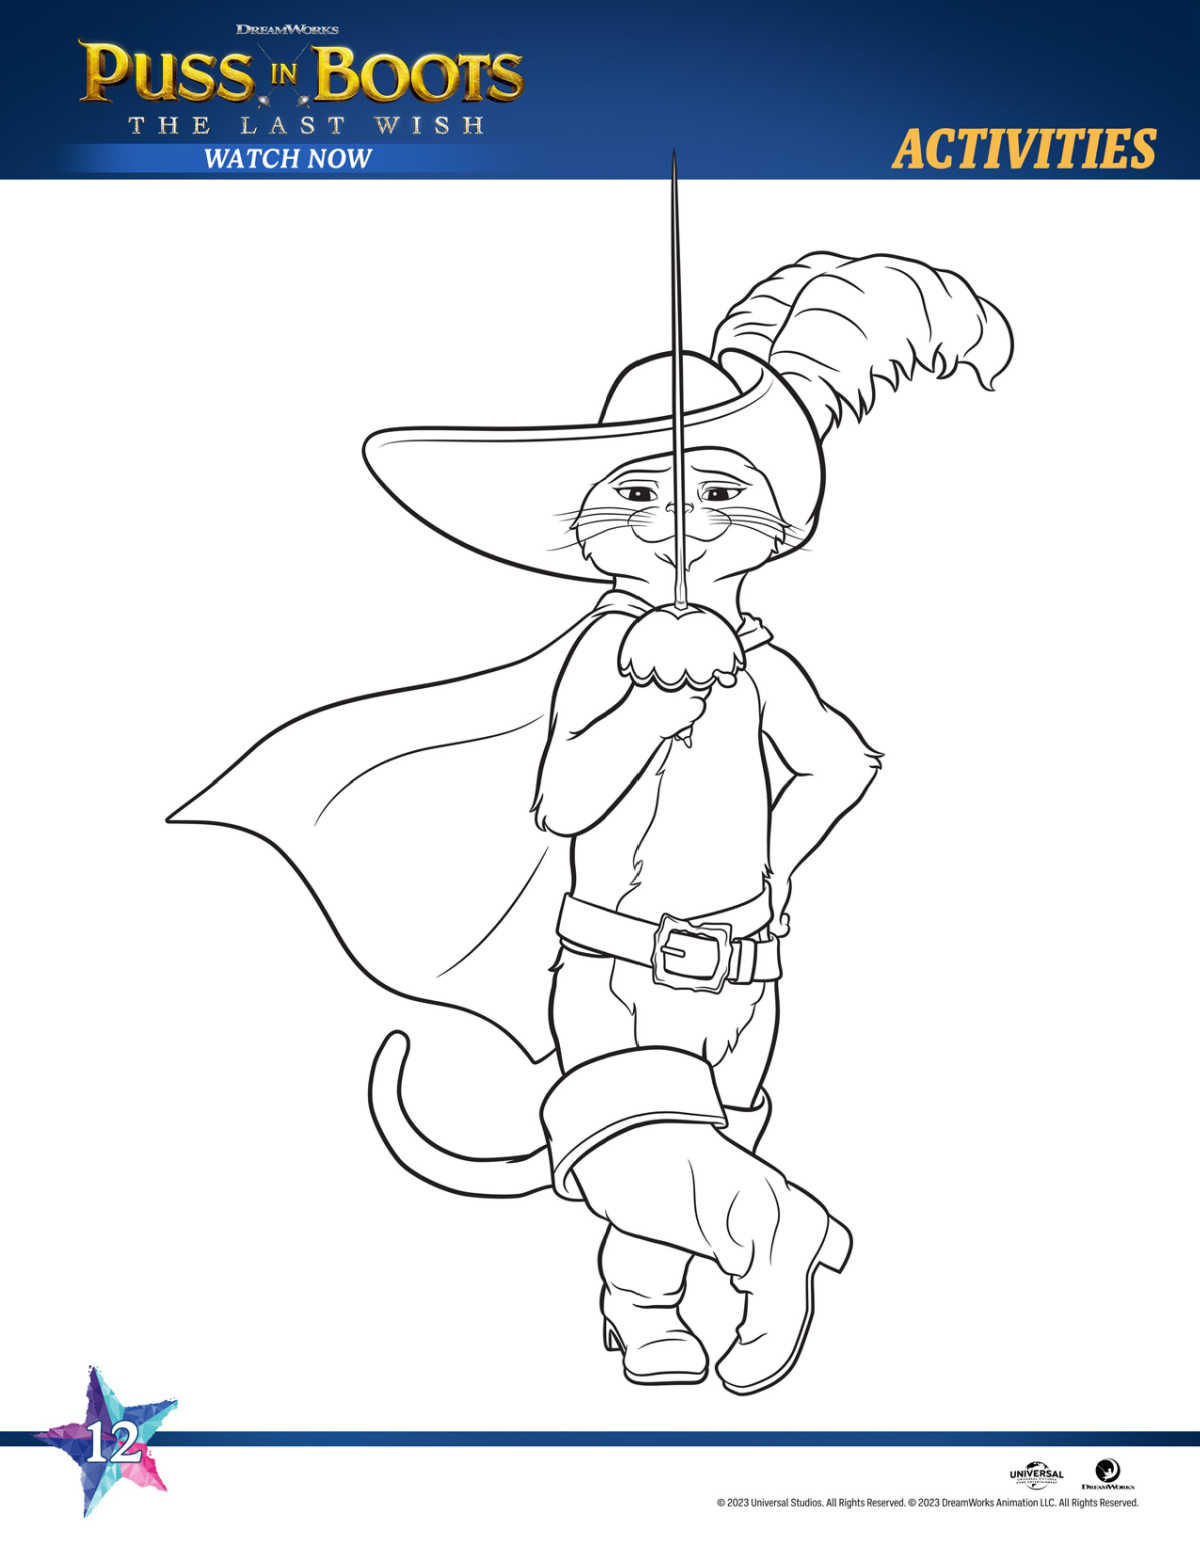 puss in boots coloring page